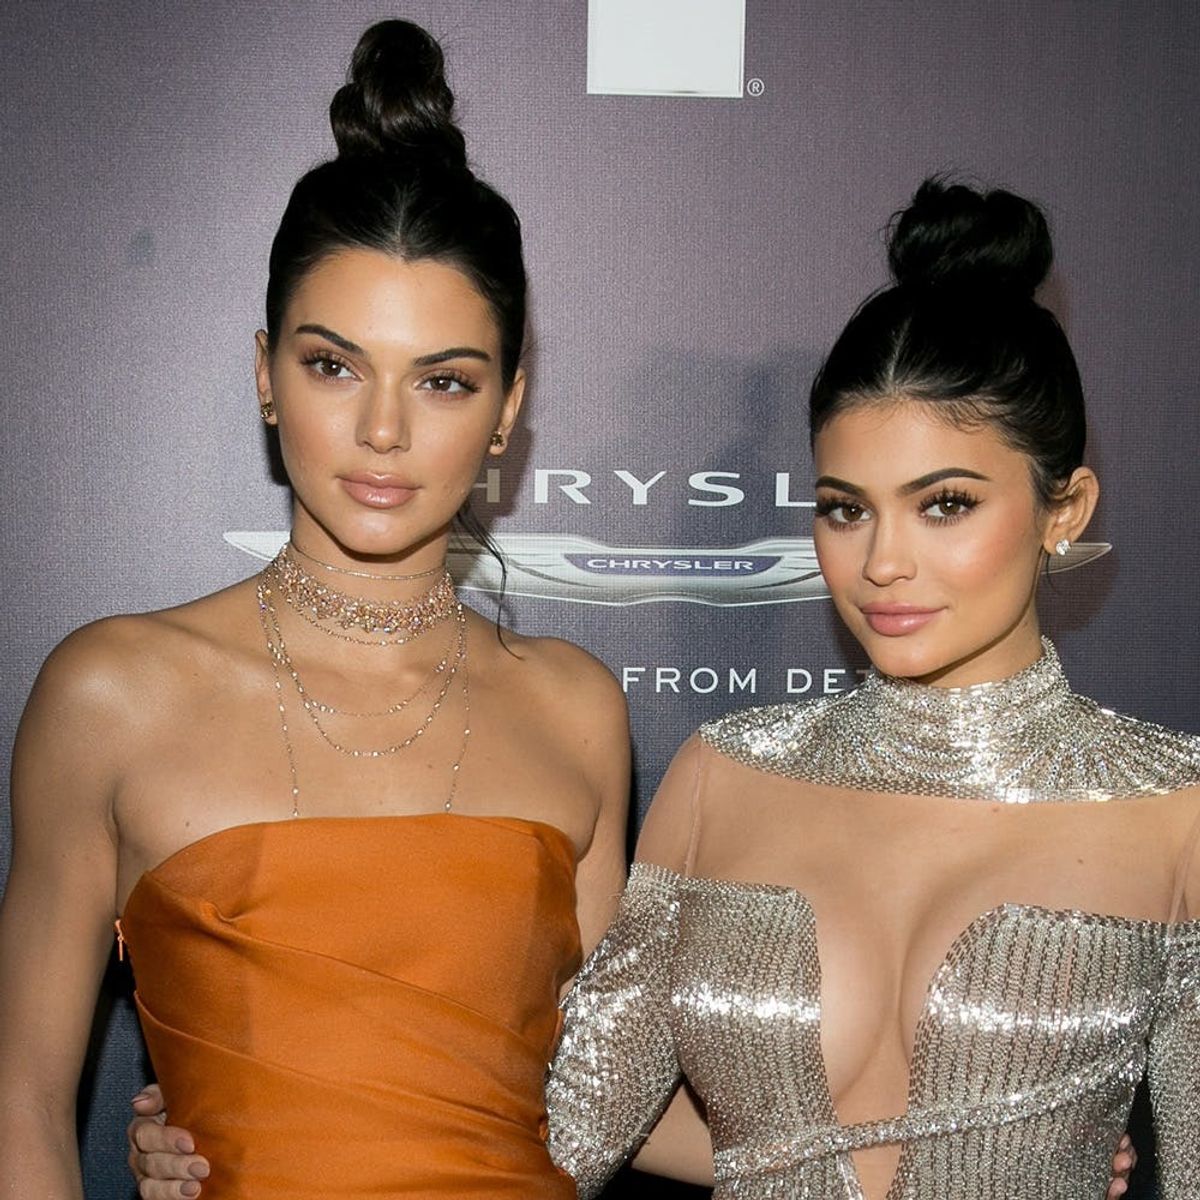 Fans Accuse Kendall + Kylie of Plagiarizing Their Latest Shoe Design